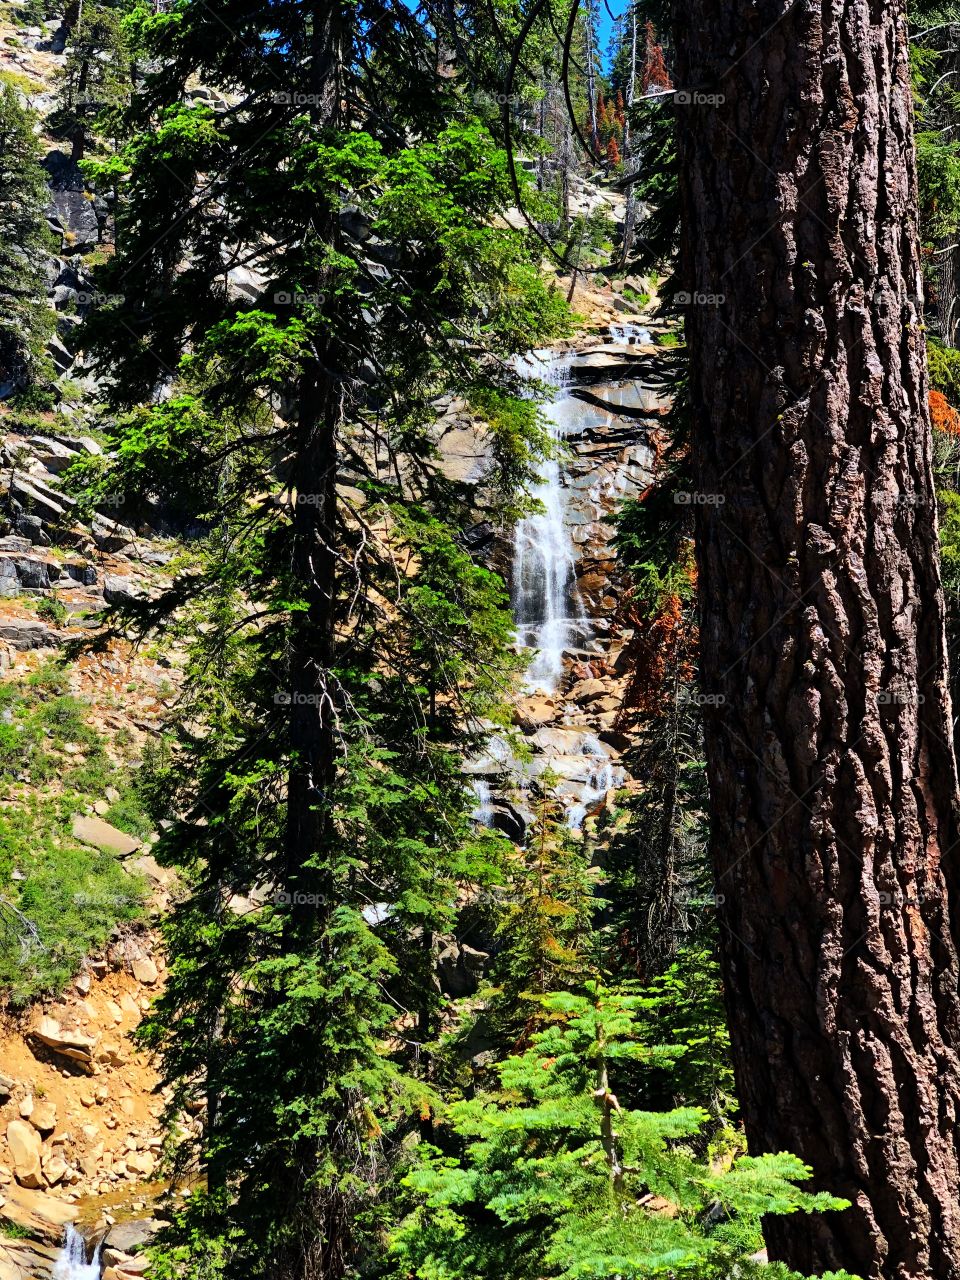 Rancheria Falls #waterfalls #hiking #nature #SierraNationalForest  #mountains #great outdoors #adventurous  #Forestry 